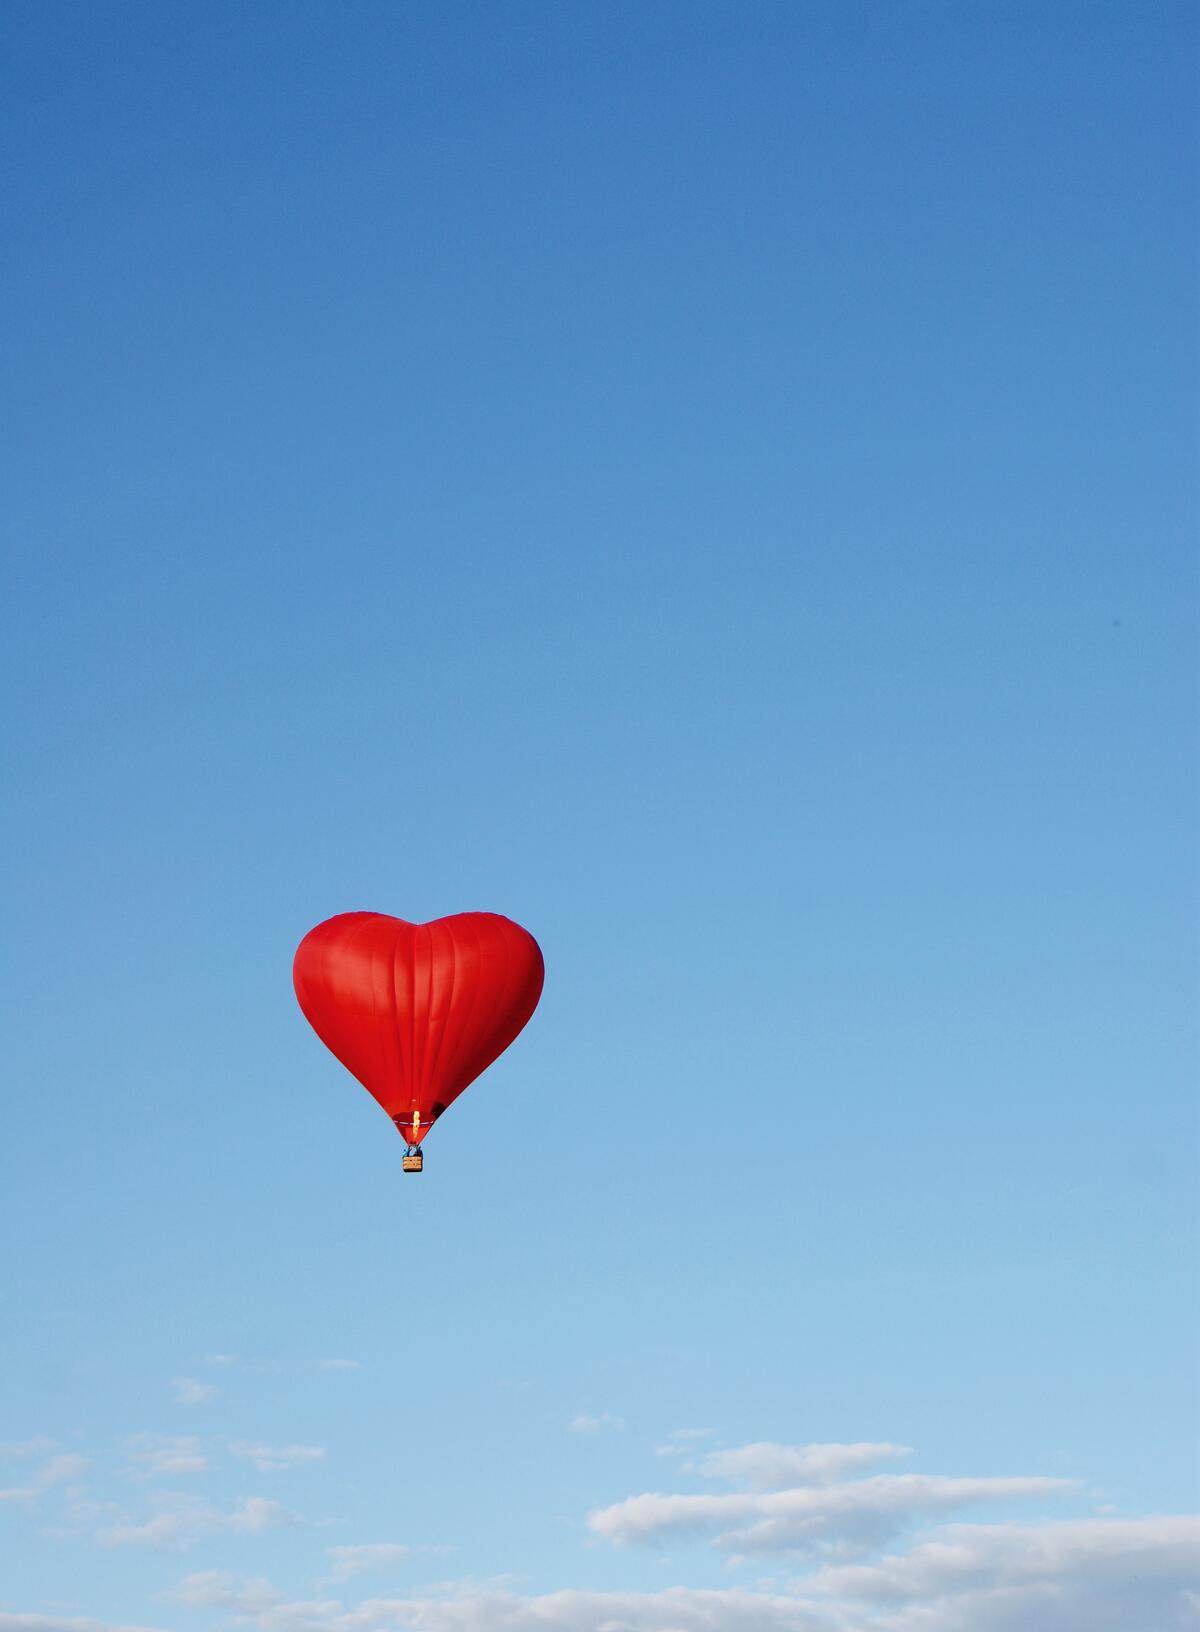 Wallpaper with a red balloon in the shape of a heart